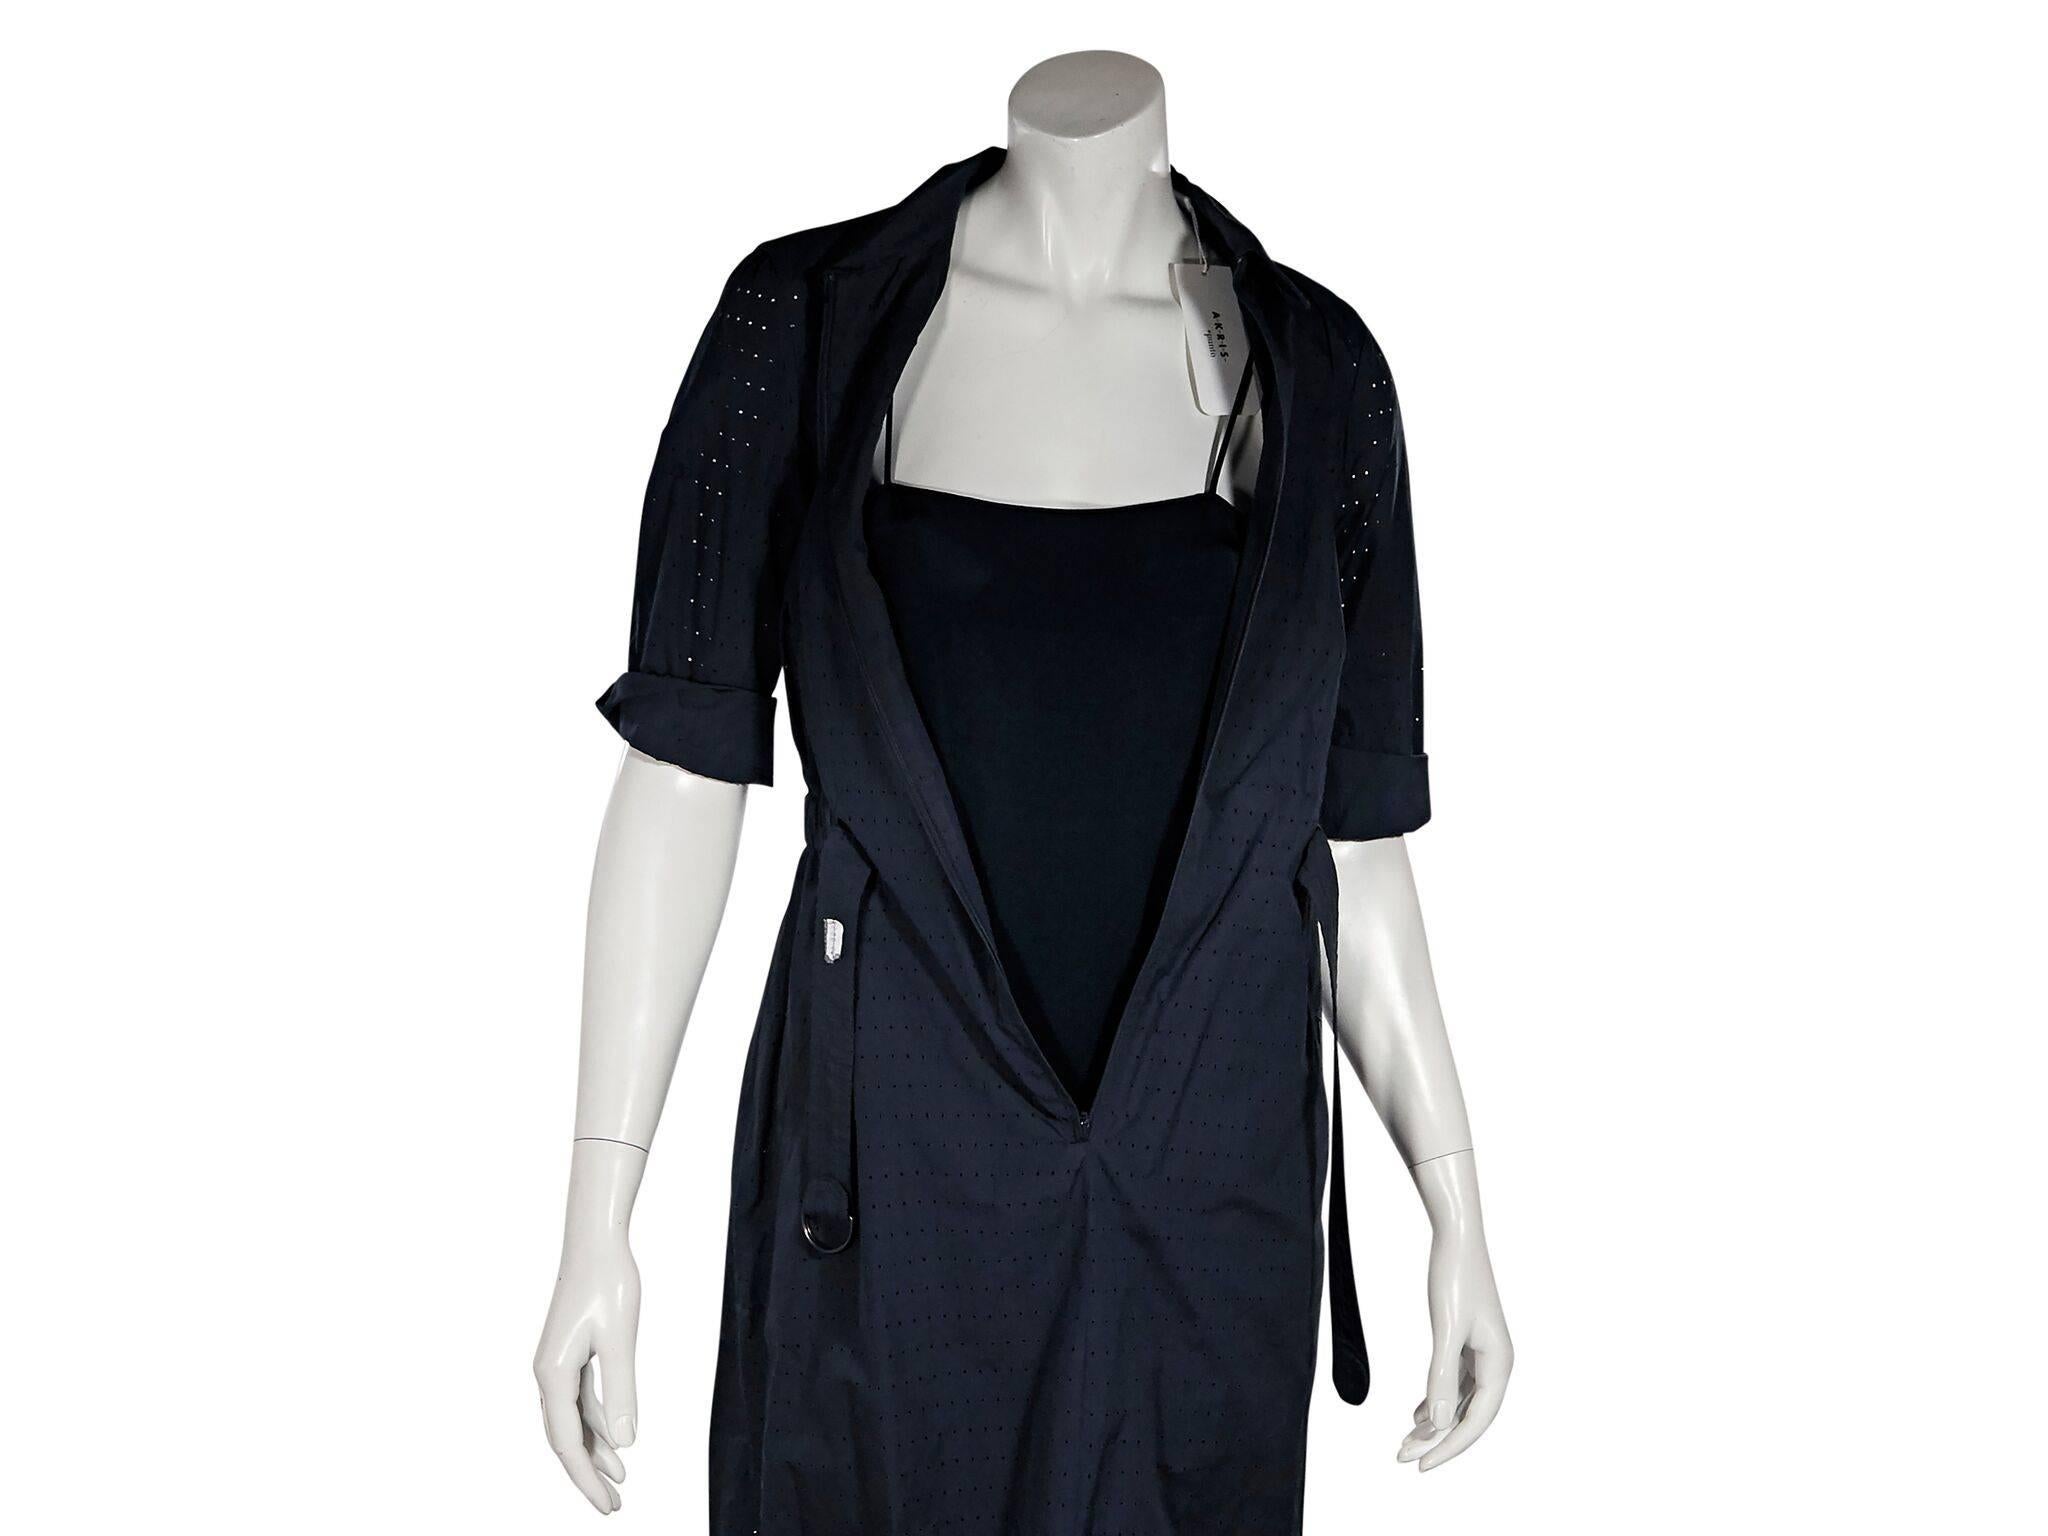 Product details:  Navy blue cotton eyelet dress by Akris.  Point collar.  Elbow-length sleeves.  Concealed zip-front closure.  Adjustable belted waist.  Slip lining.  38